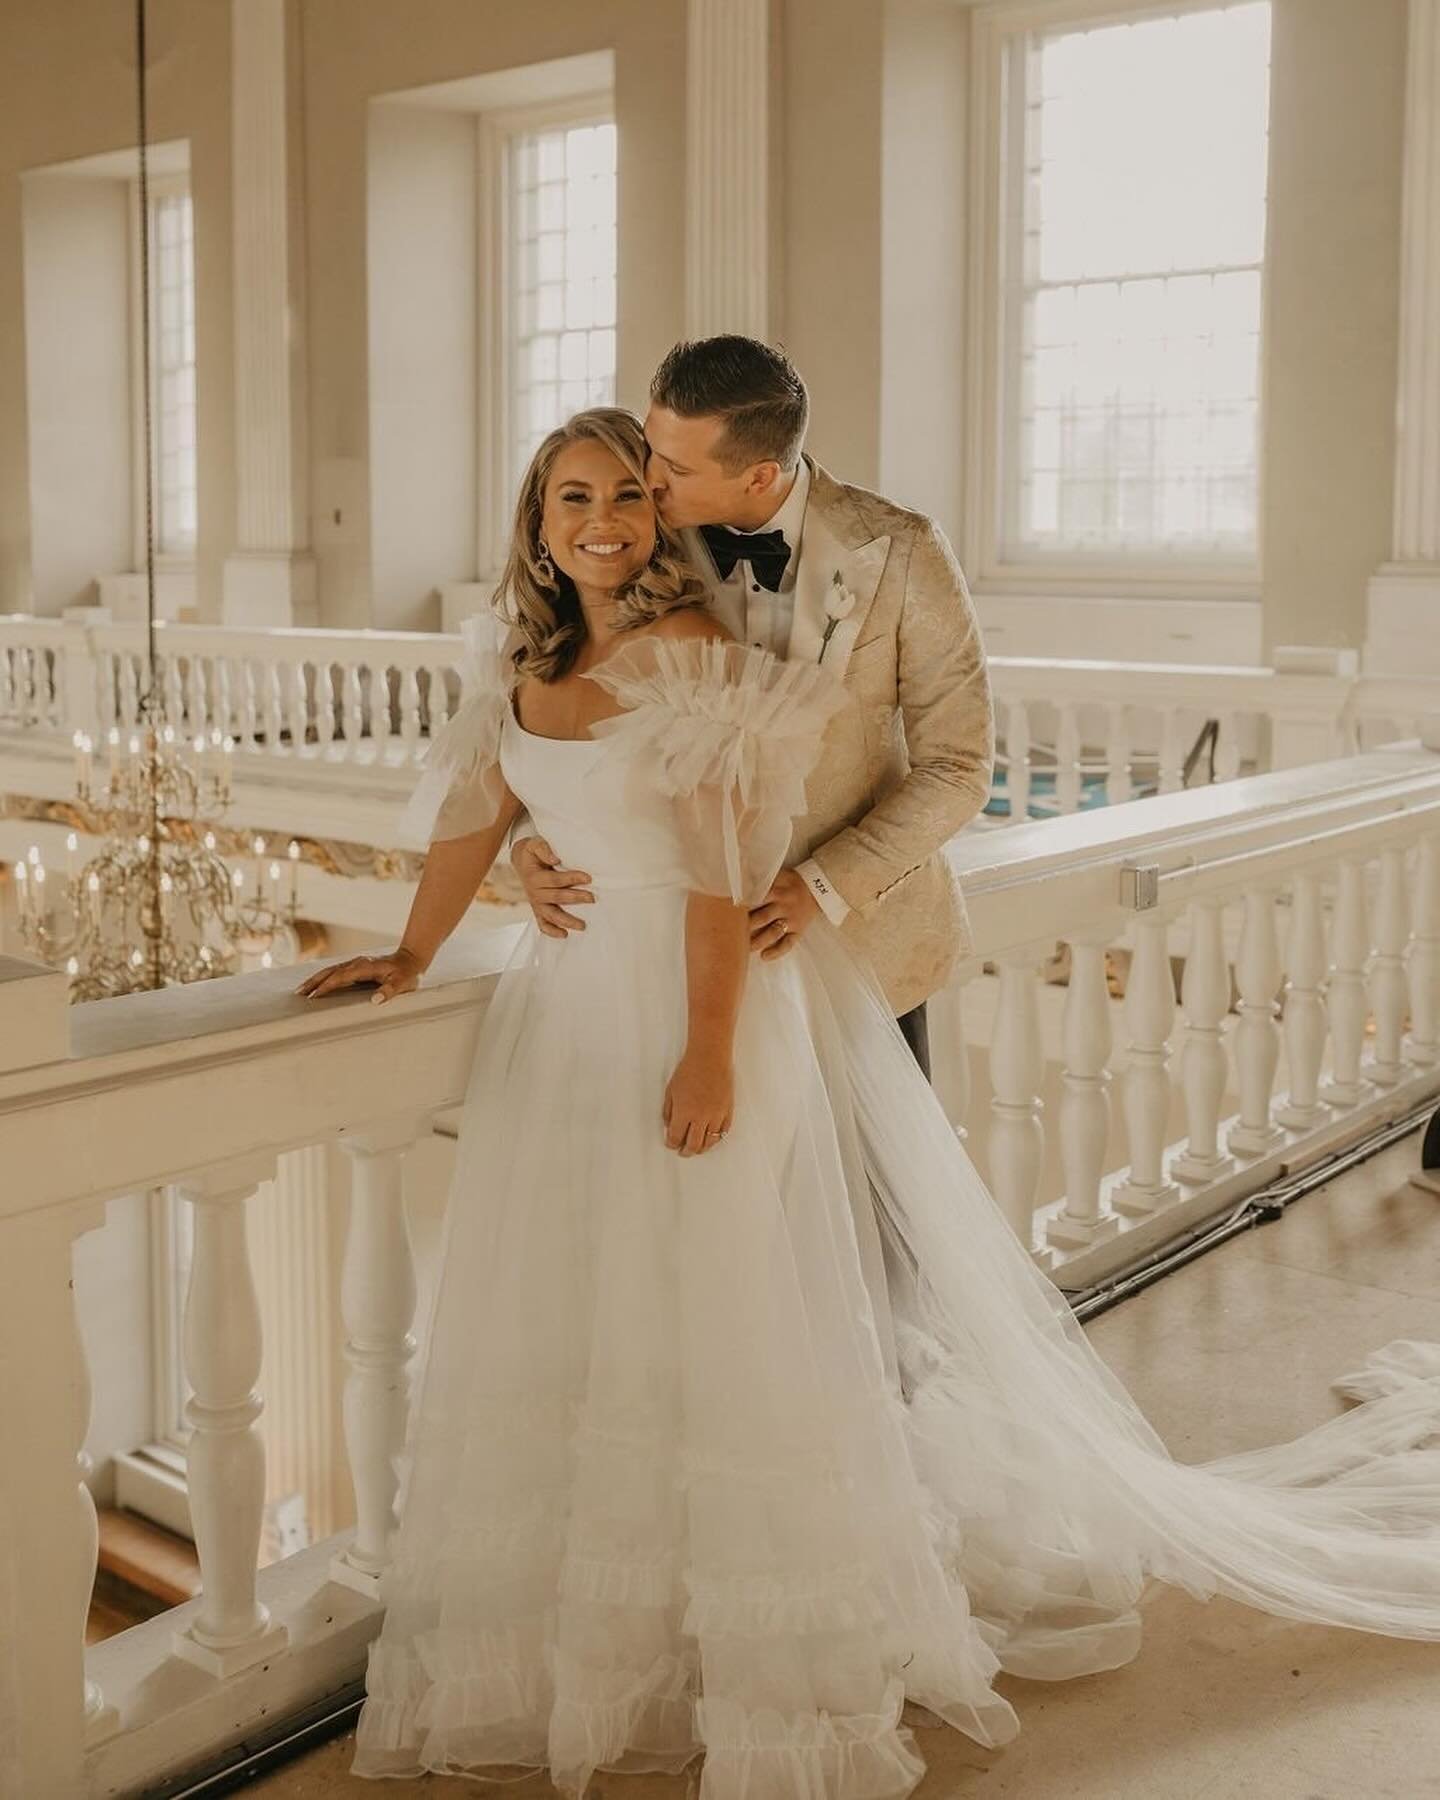 &ldquo;I would&rsquo;ve NEVER guessed this about myself, but I found my dress on the first day of wedding dress shopping. 

I worked with a fabulous Halfpenny London stylist, and I fell in love with the Mayfair dress right away! I knew I wanted some 